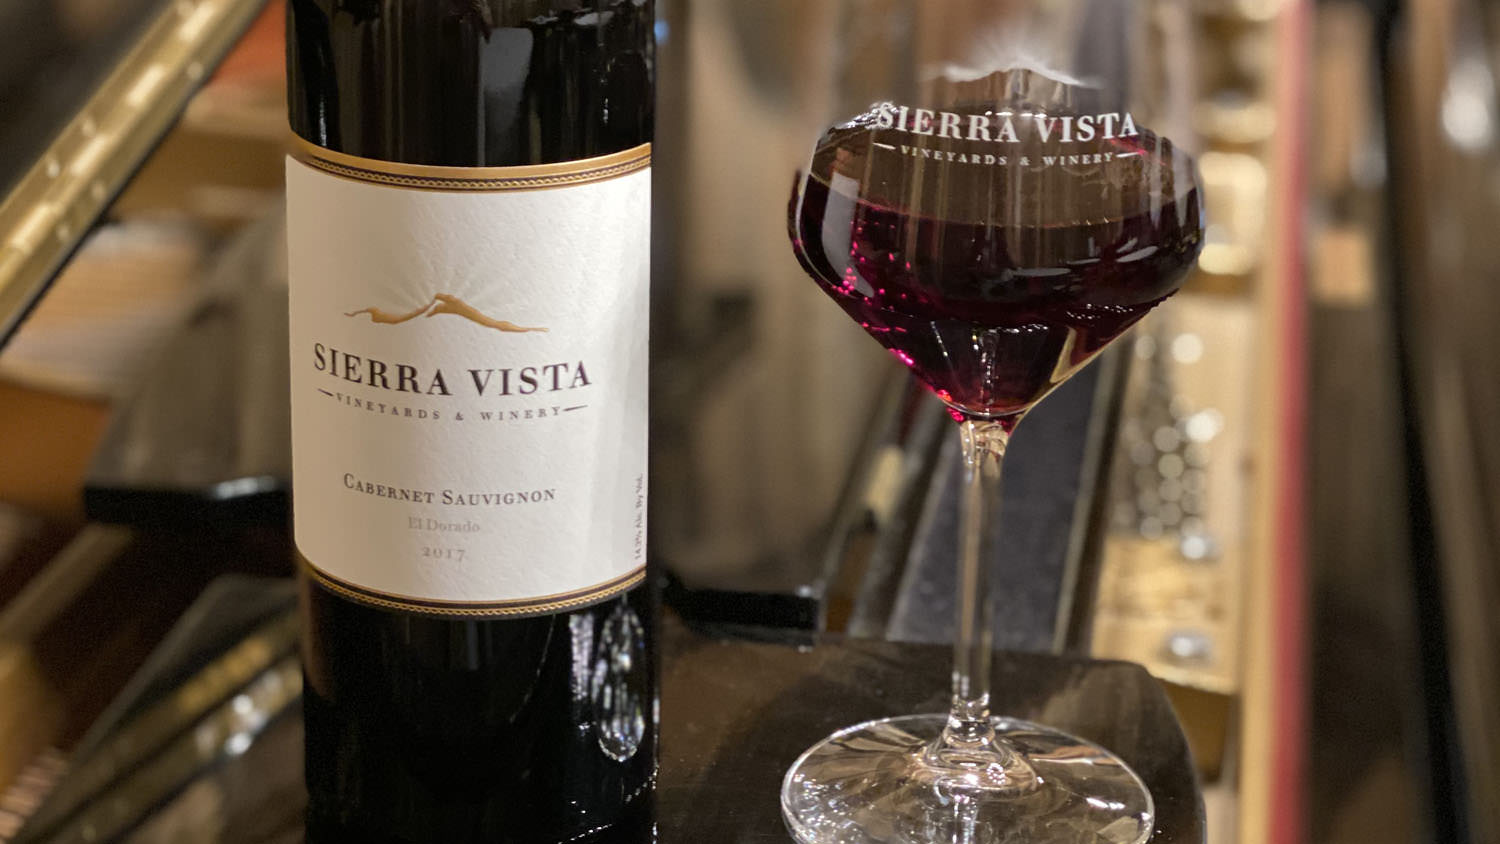 Sierra Vista Event Room - Bottle of Cabernet Sauvignon and a Glass of Wine